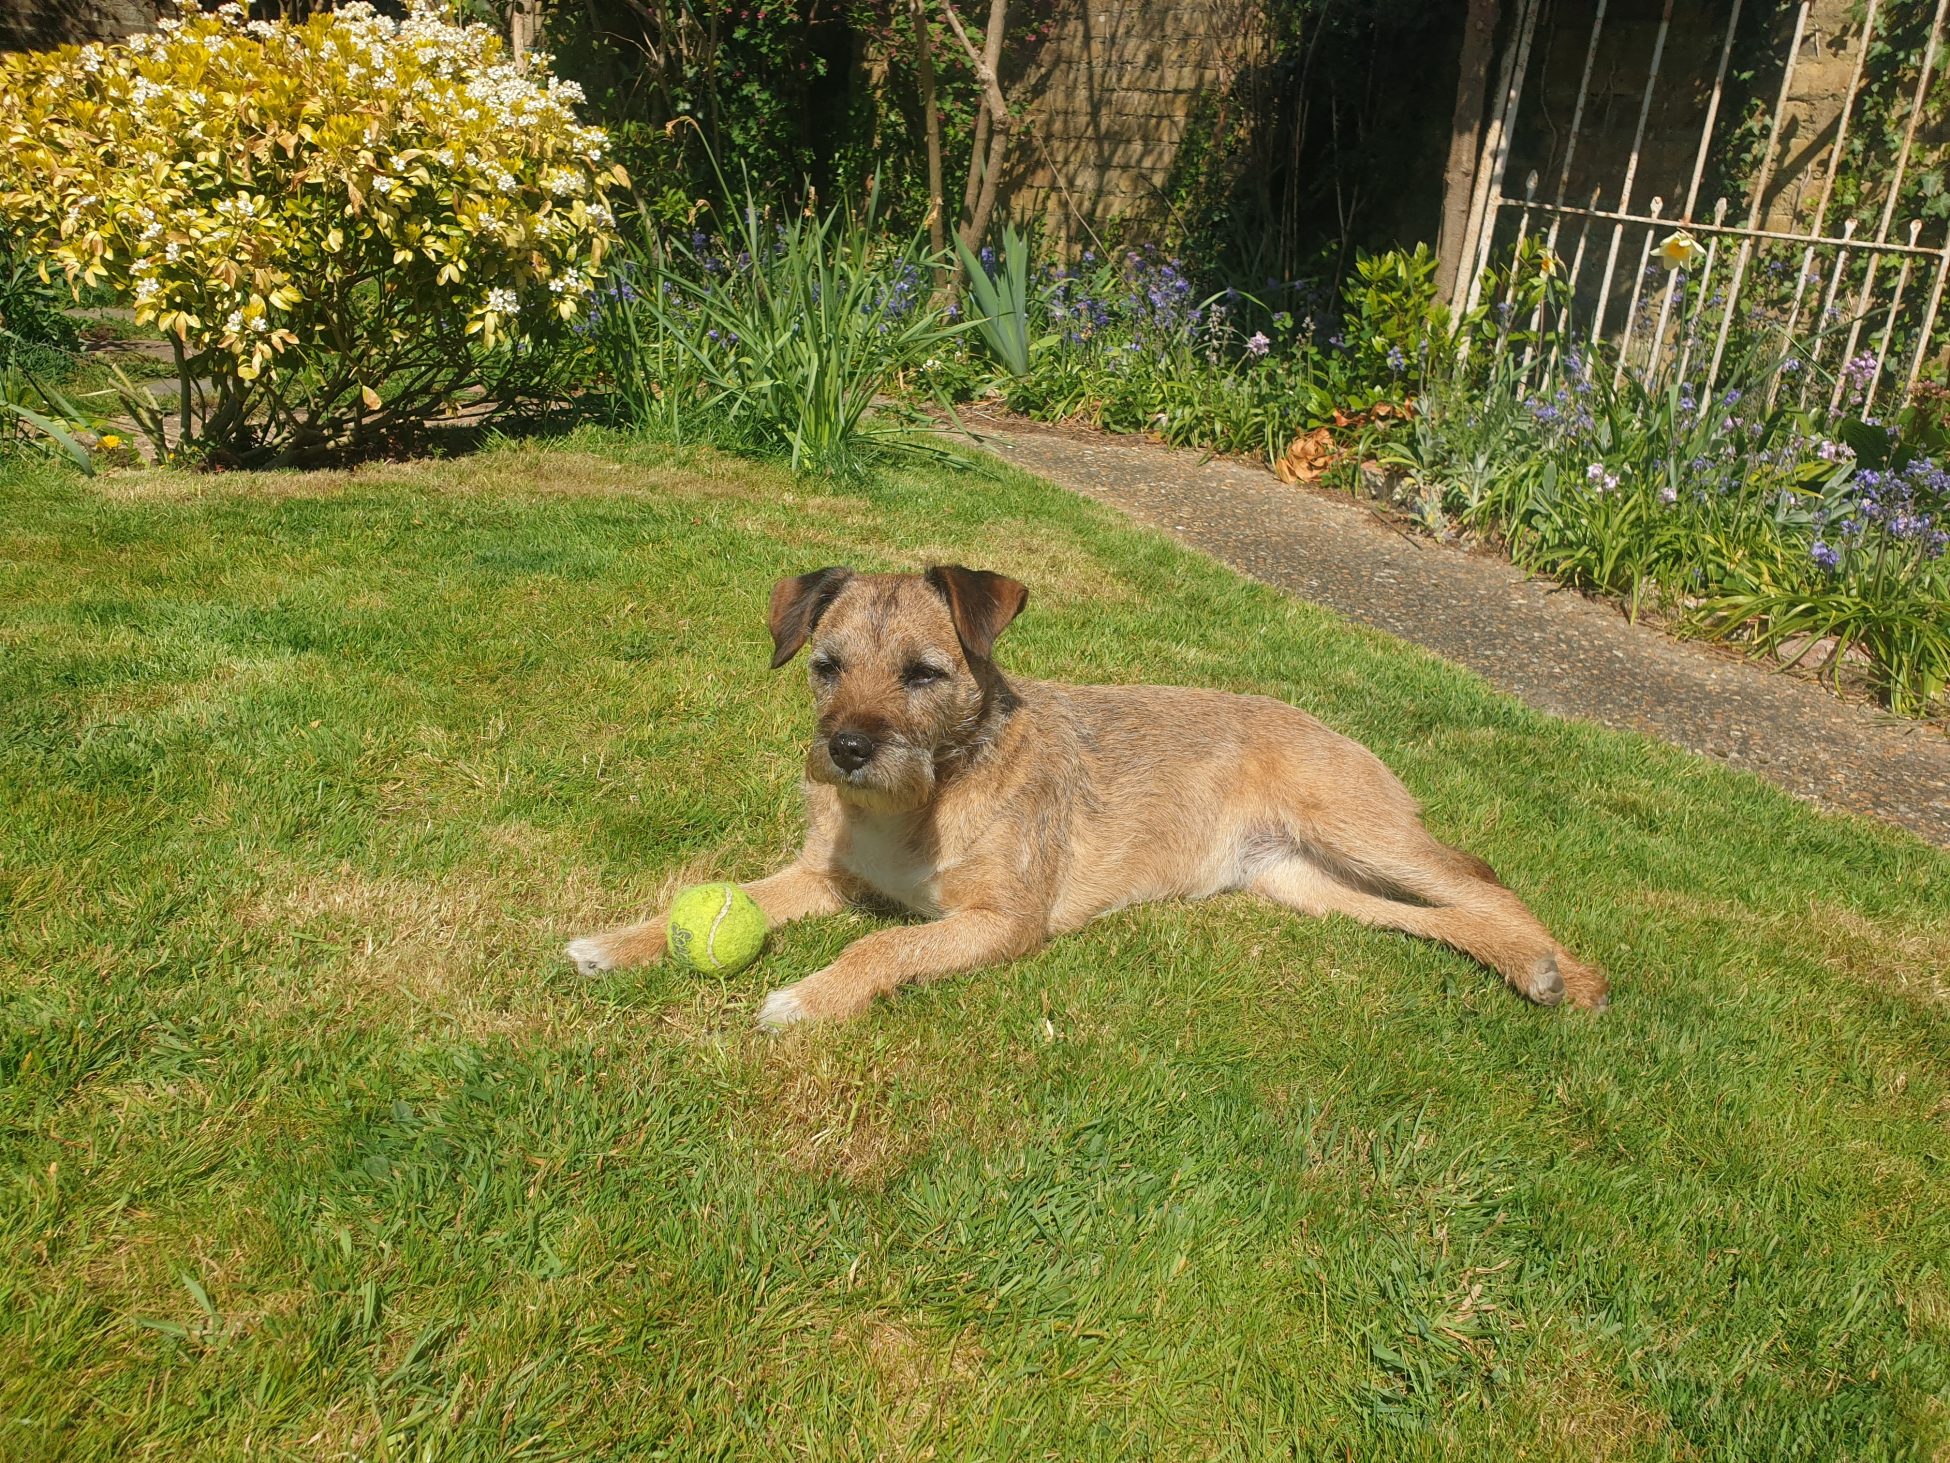 Luna the border terrier lying on a lawn in the sun with her head raised and a tennis ball between her front paws